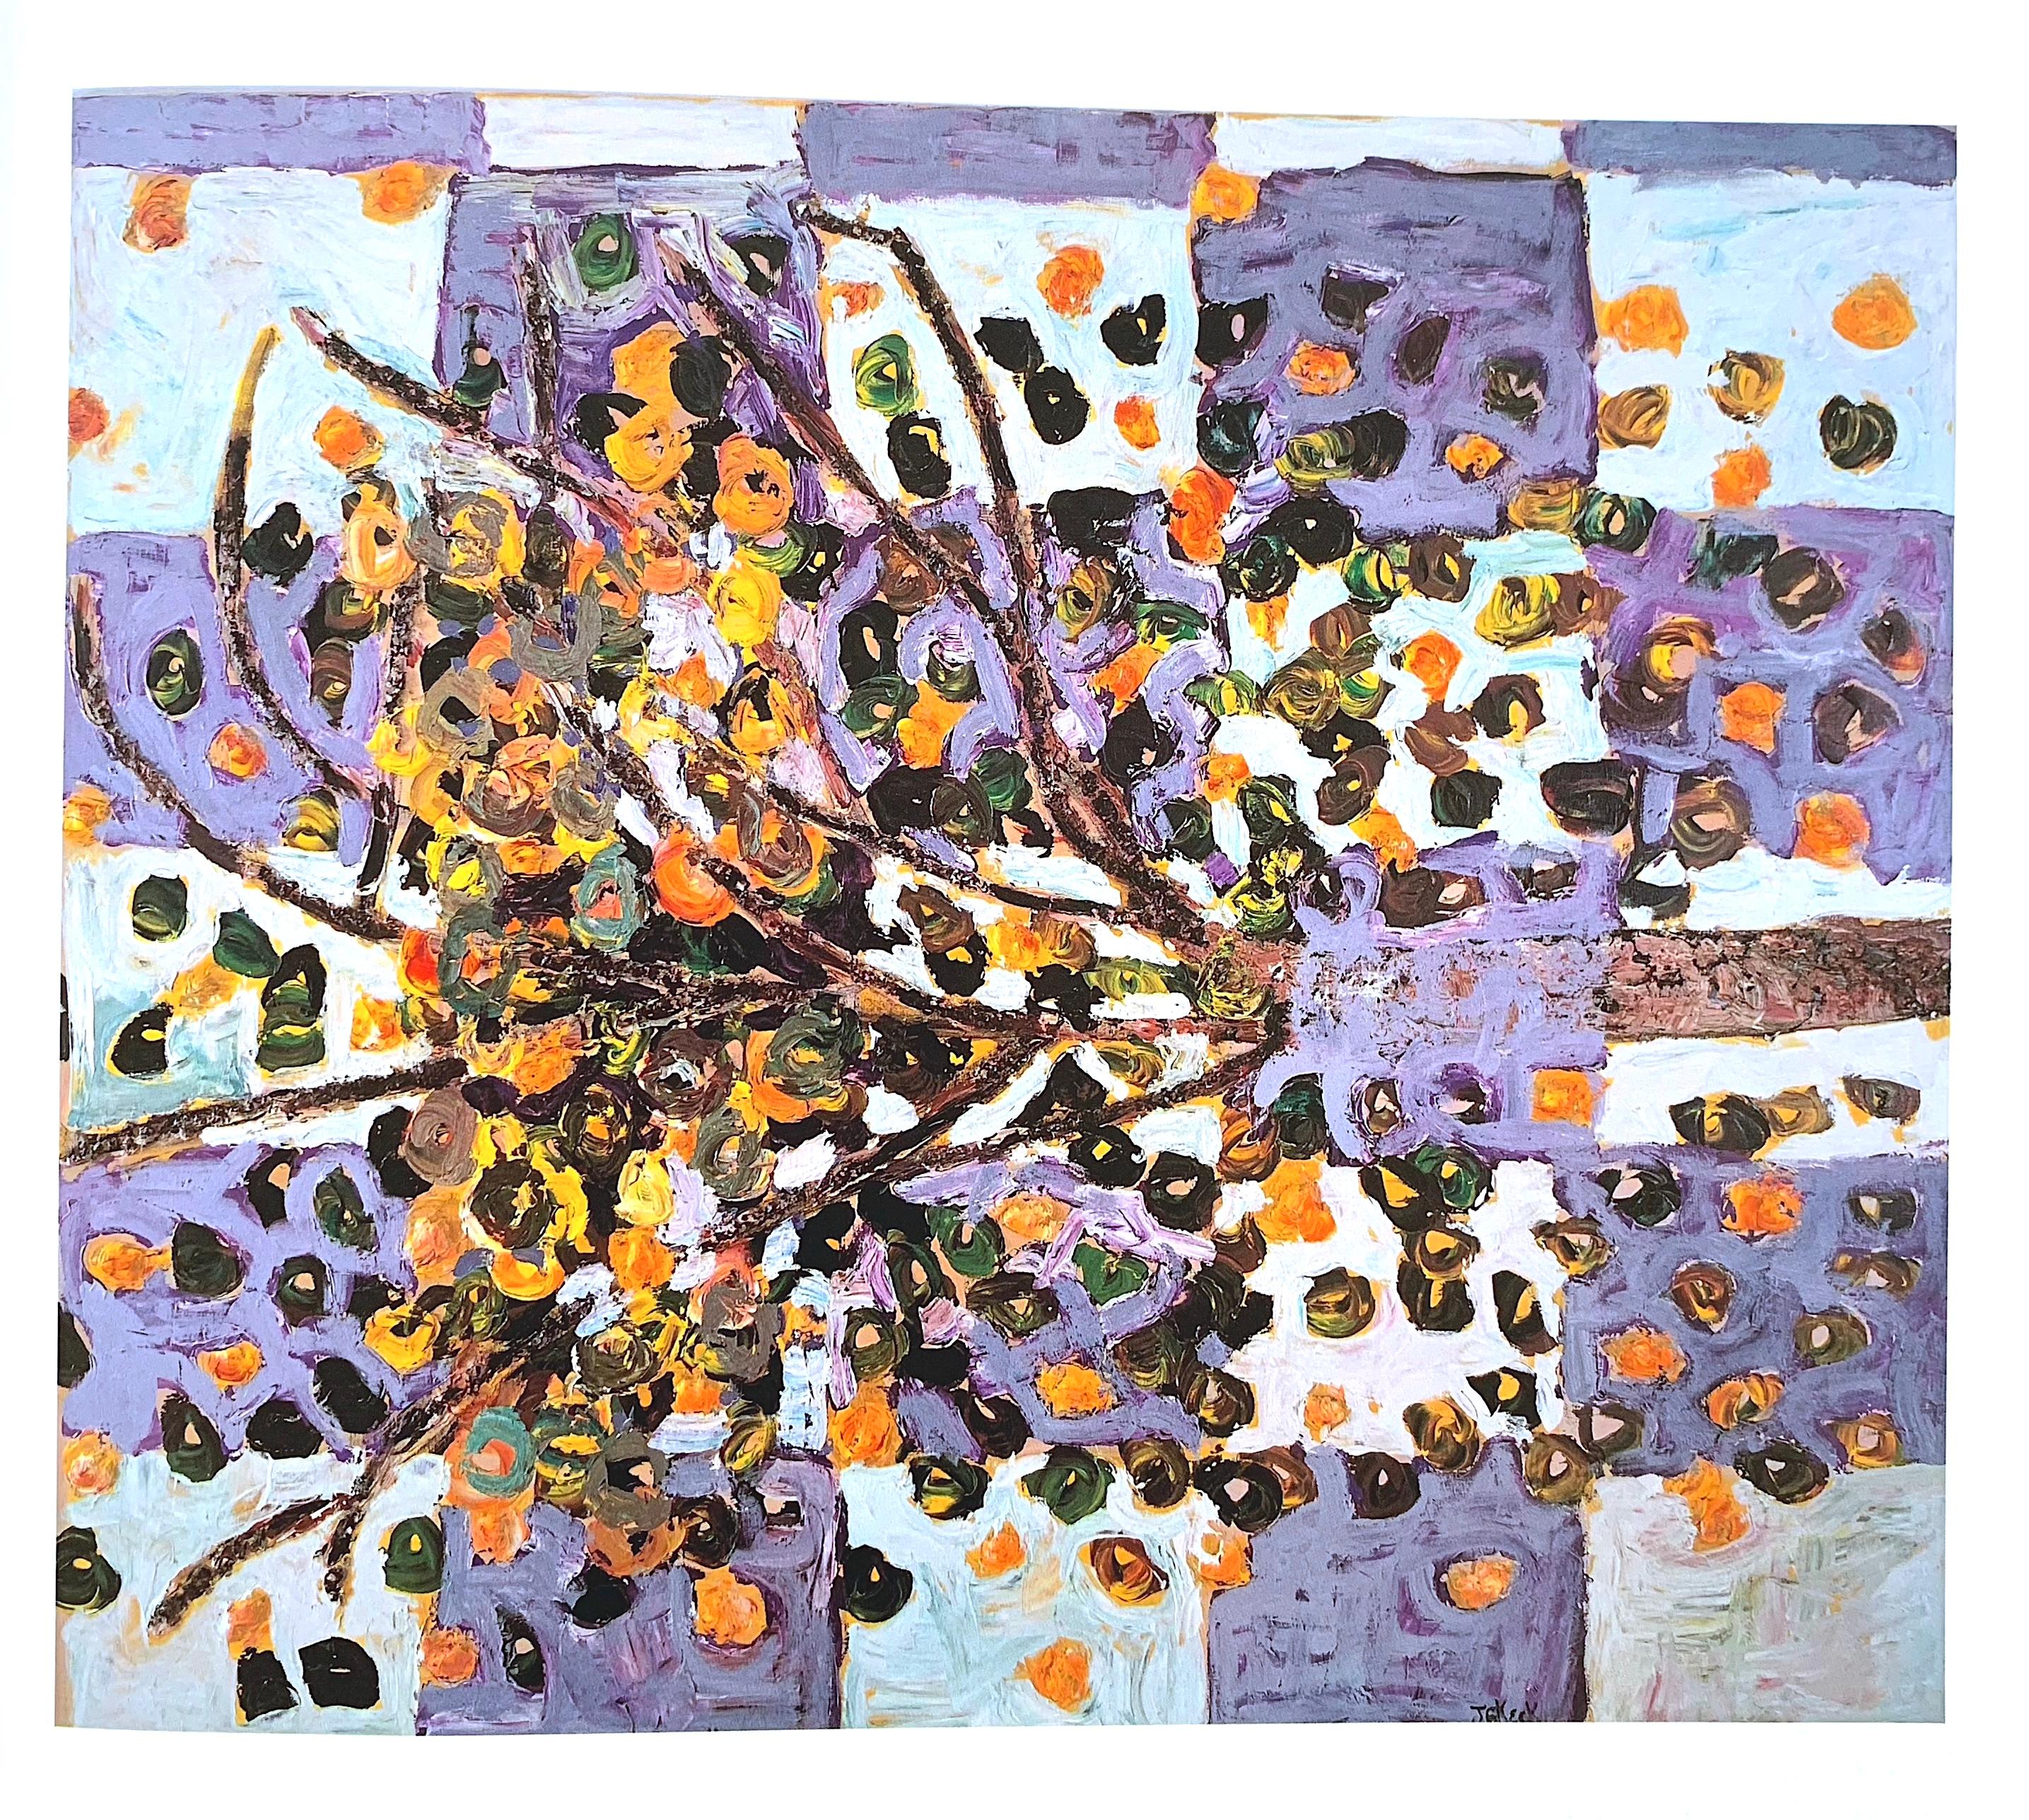 Jeanne Gentry Keck, Persimmon and Perception, Oil on Canvas, 1996